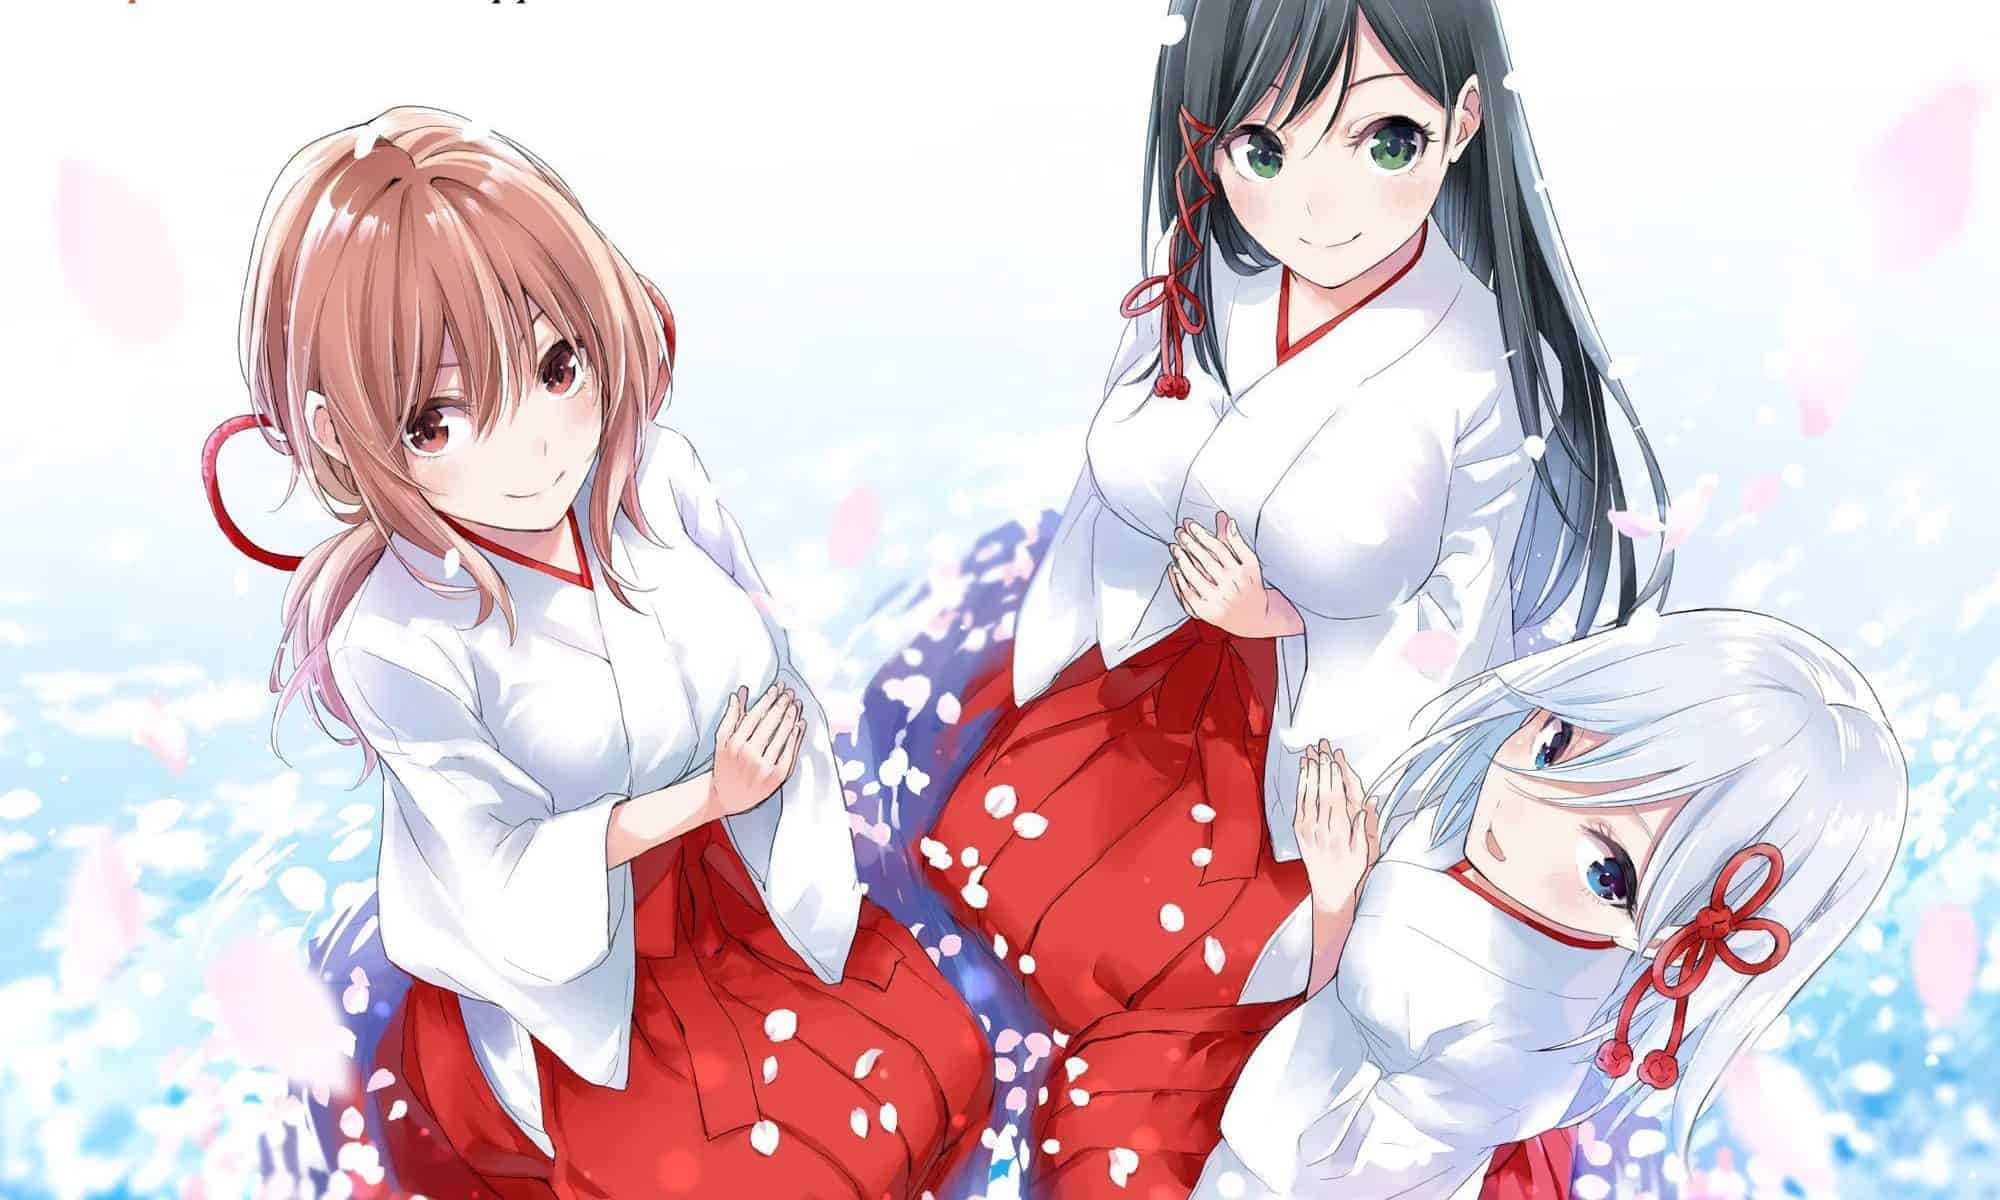 Tying the Knot with an Amagami Sister Chapter 108 Release Date Details